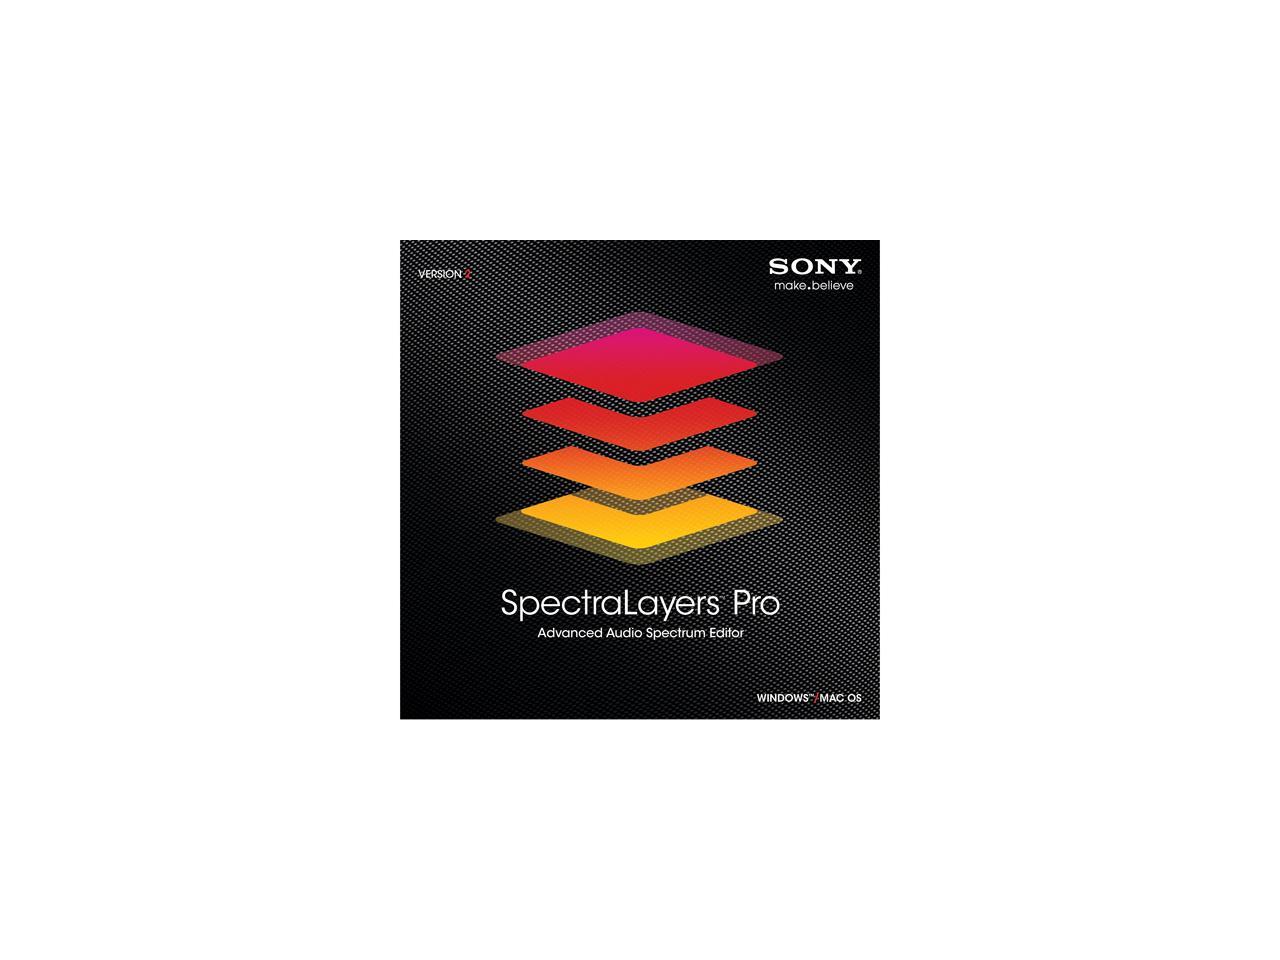 spectralayers pro 8 review